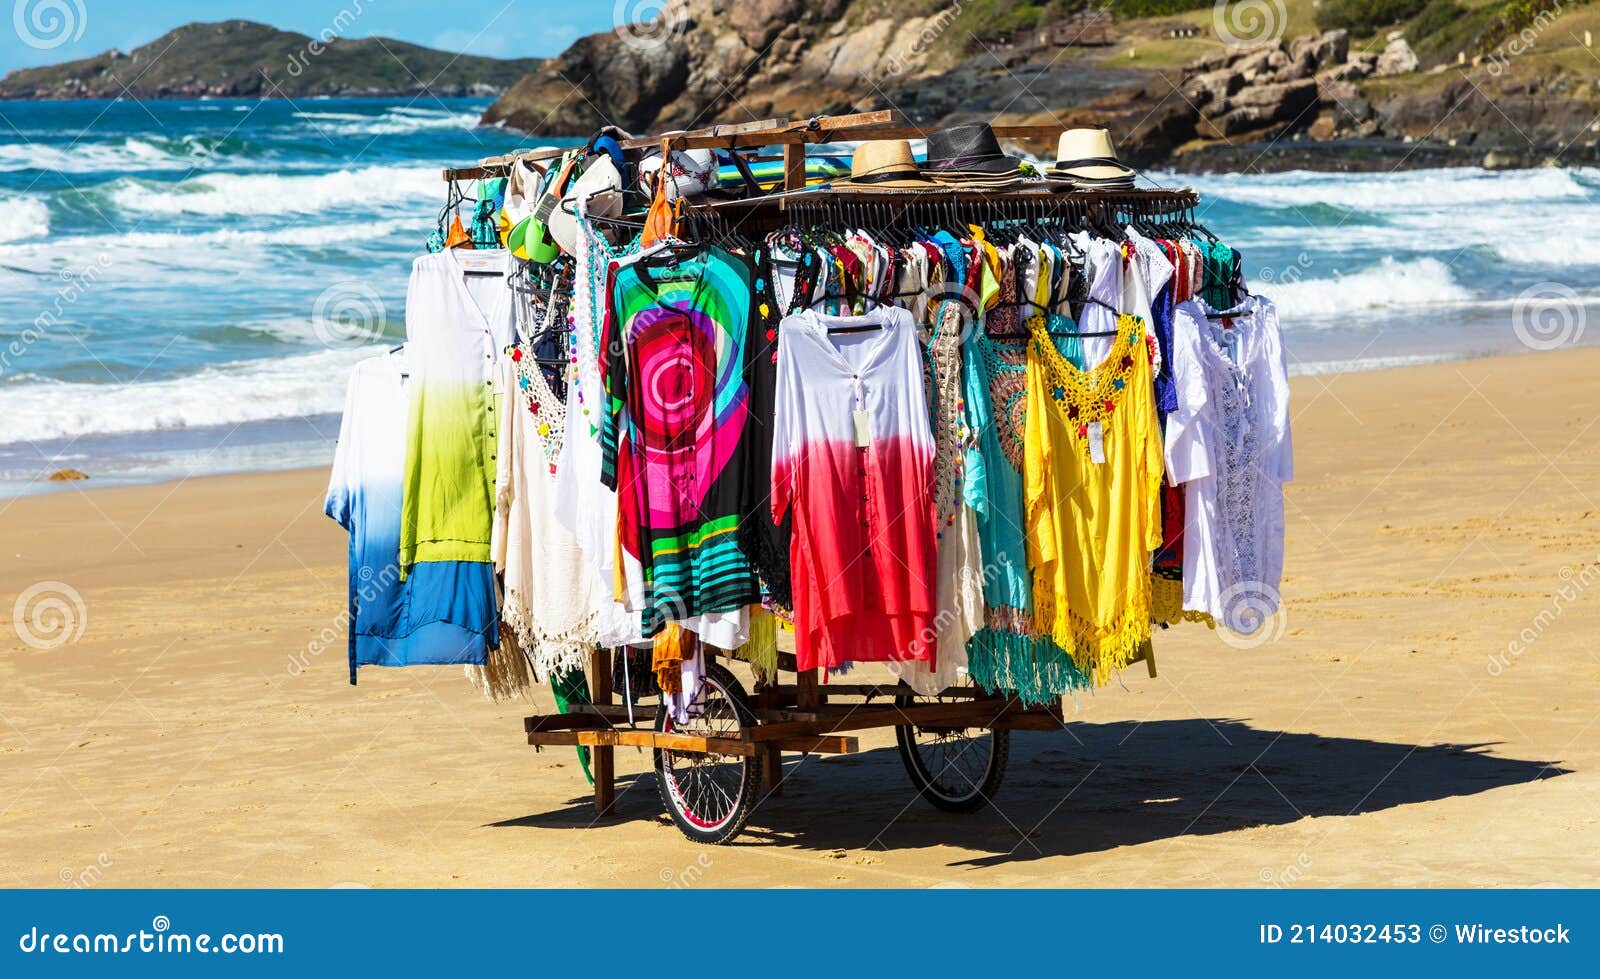 Beach Clothes Being Sold at the Santinho Beach in Florianopolis